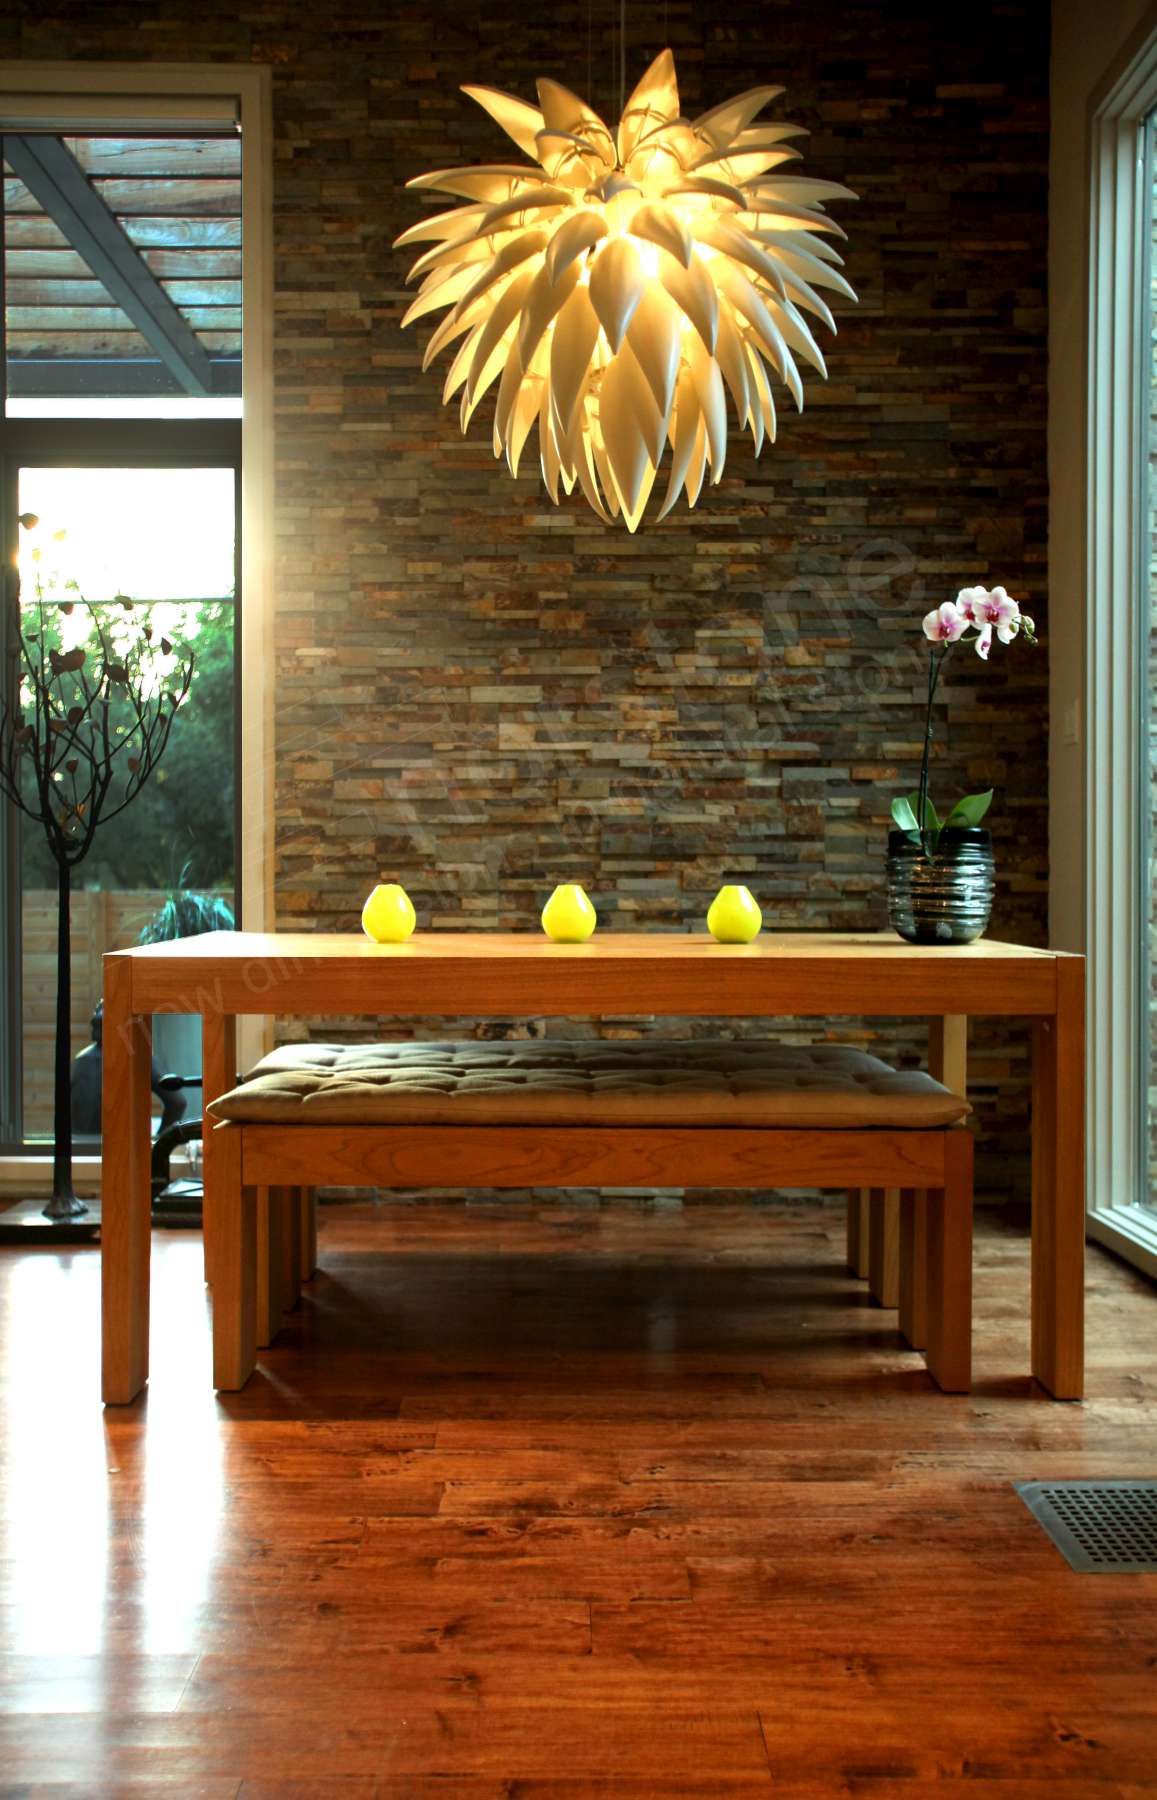 Design School - How to Pick a Great Lighting Fixture for your stone veneer wall